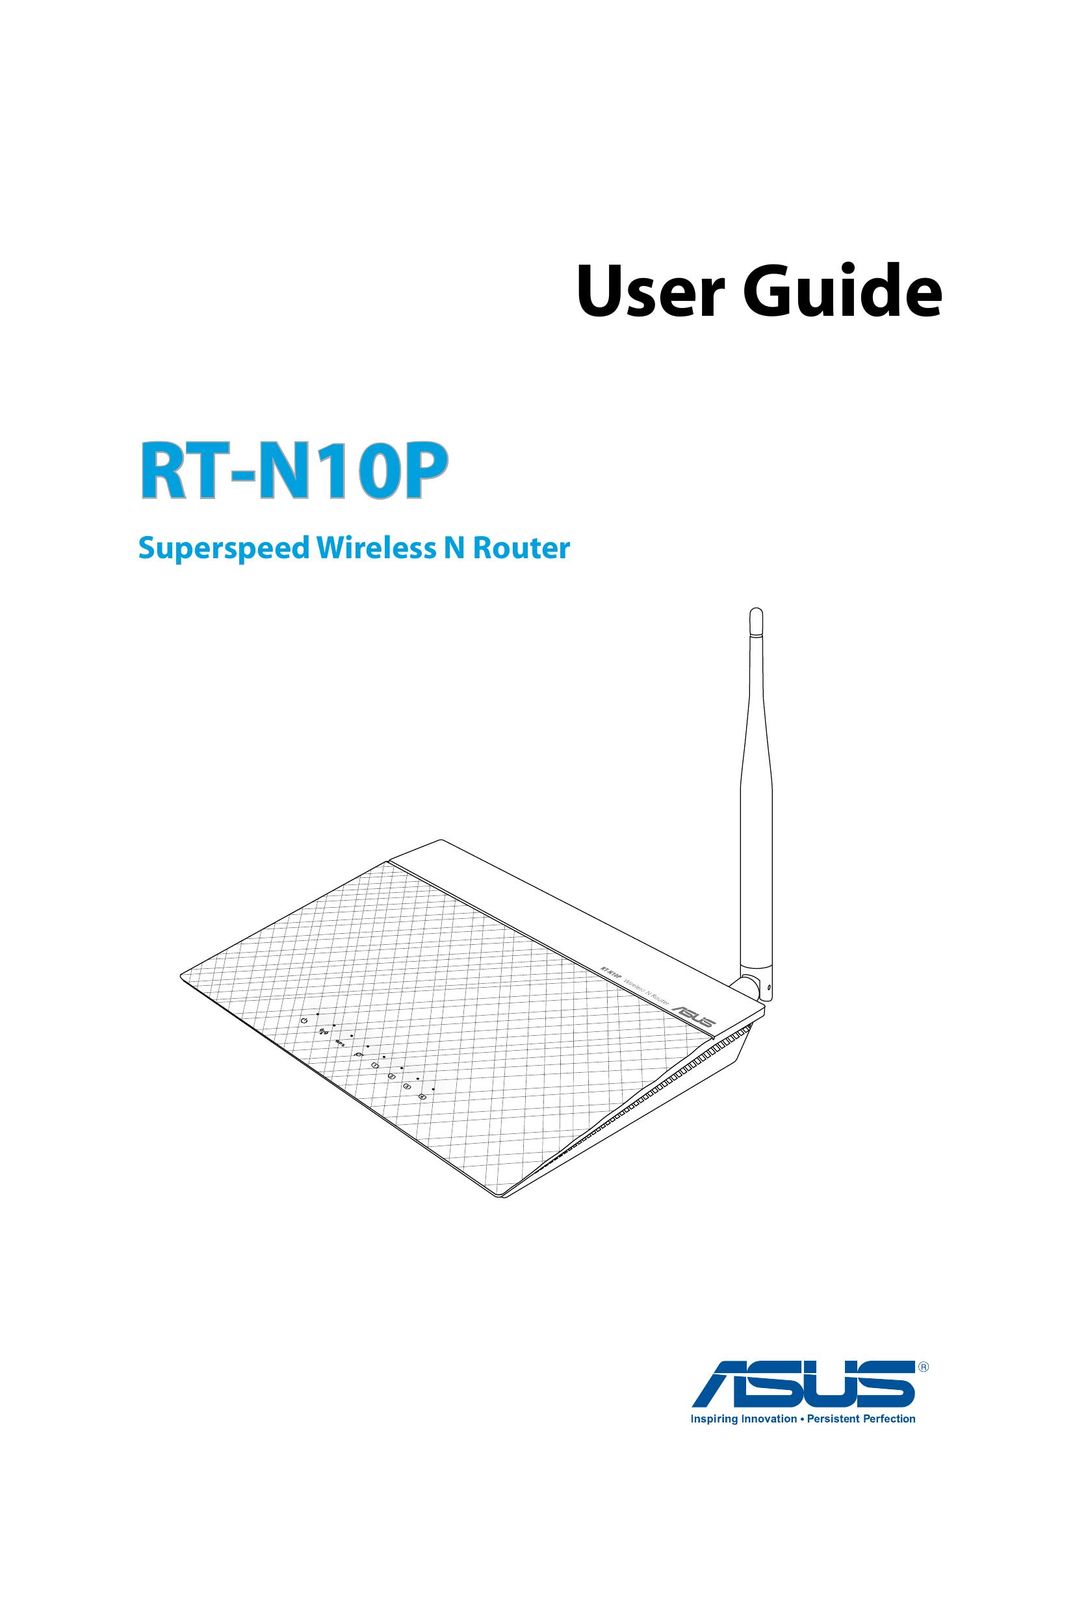 Asus RTN10P Network Router User Manual